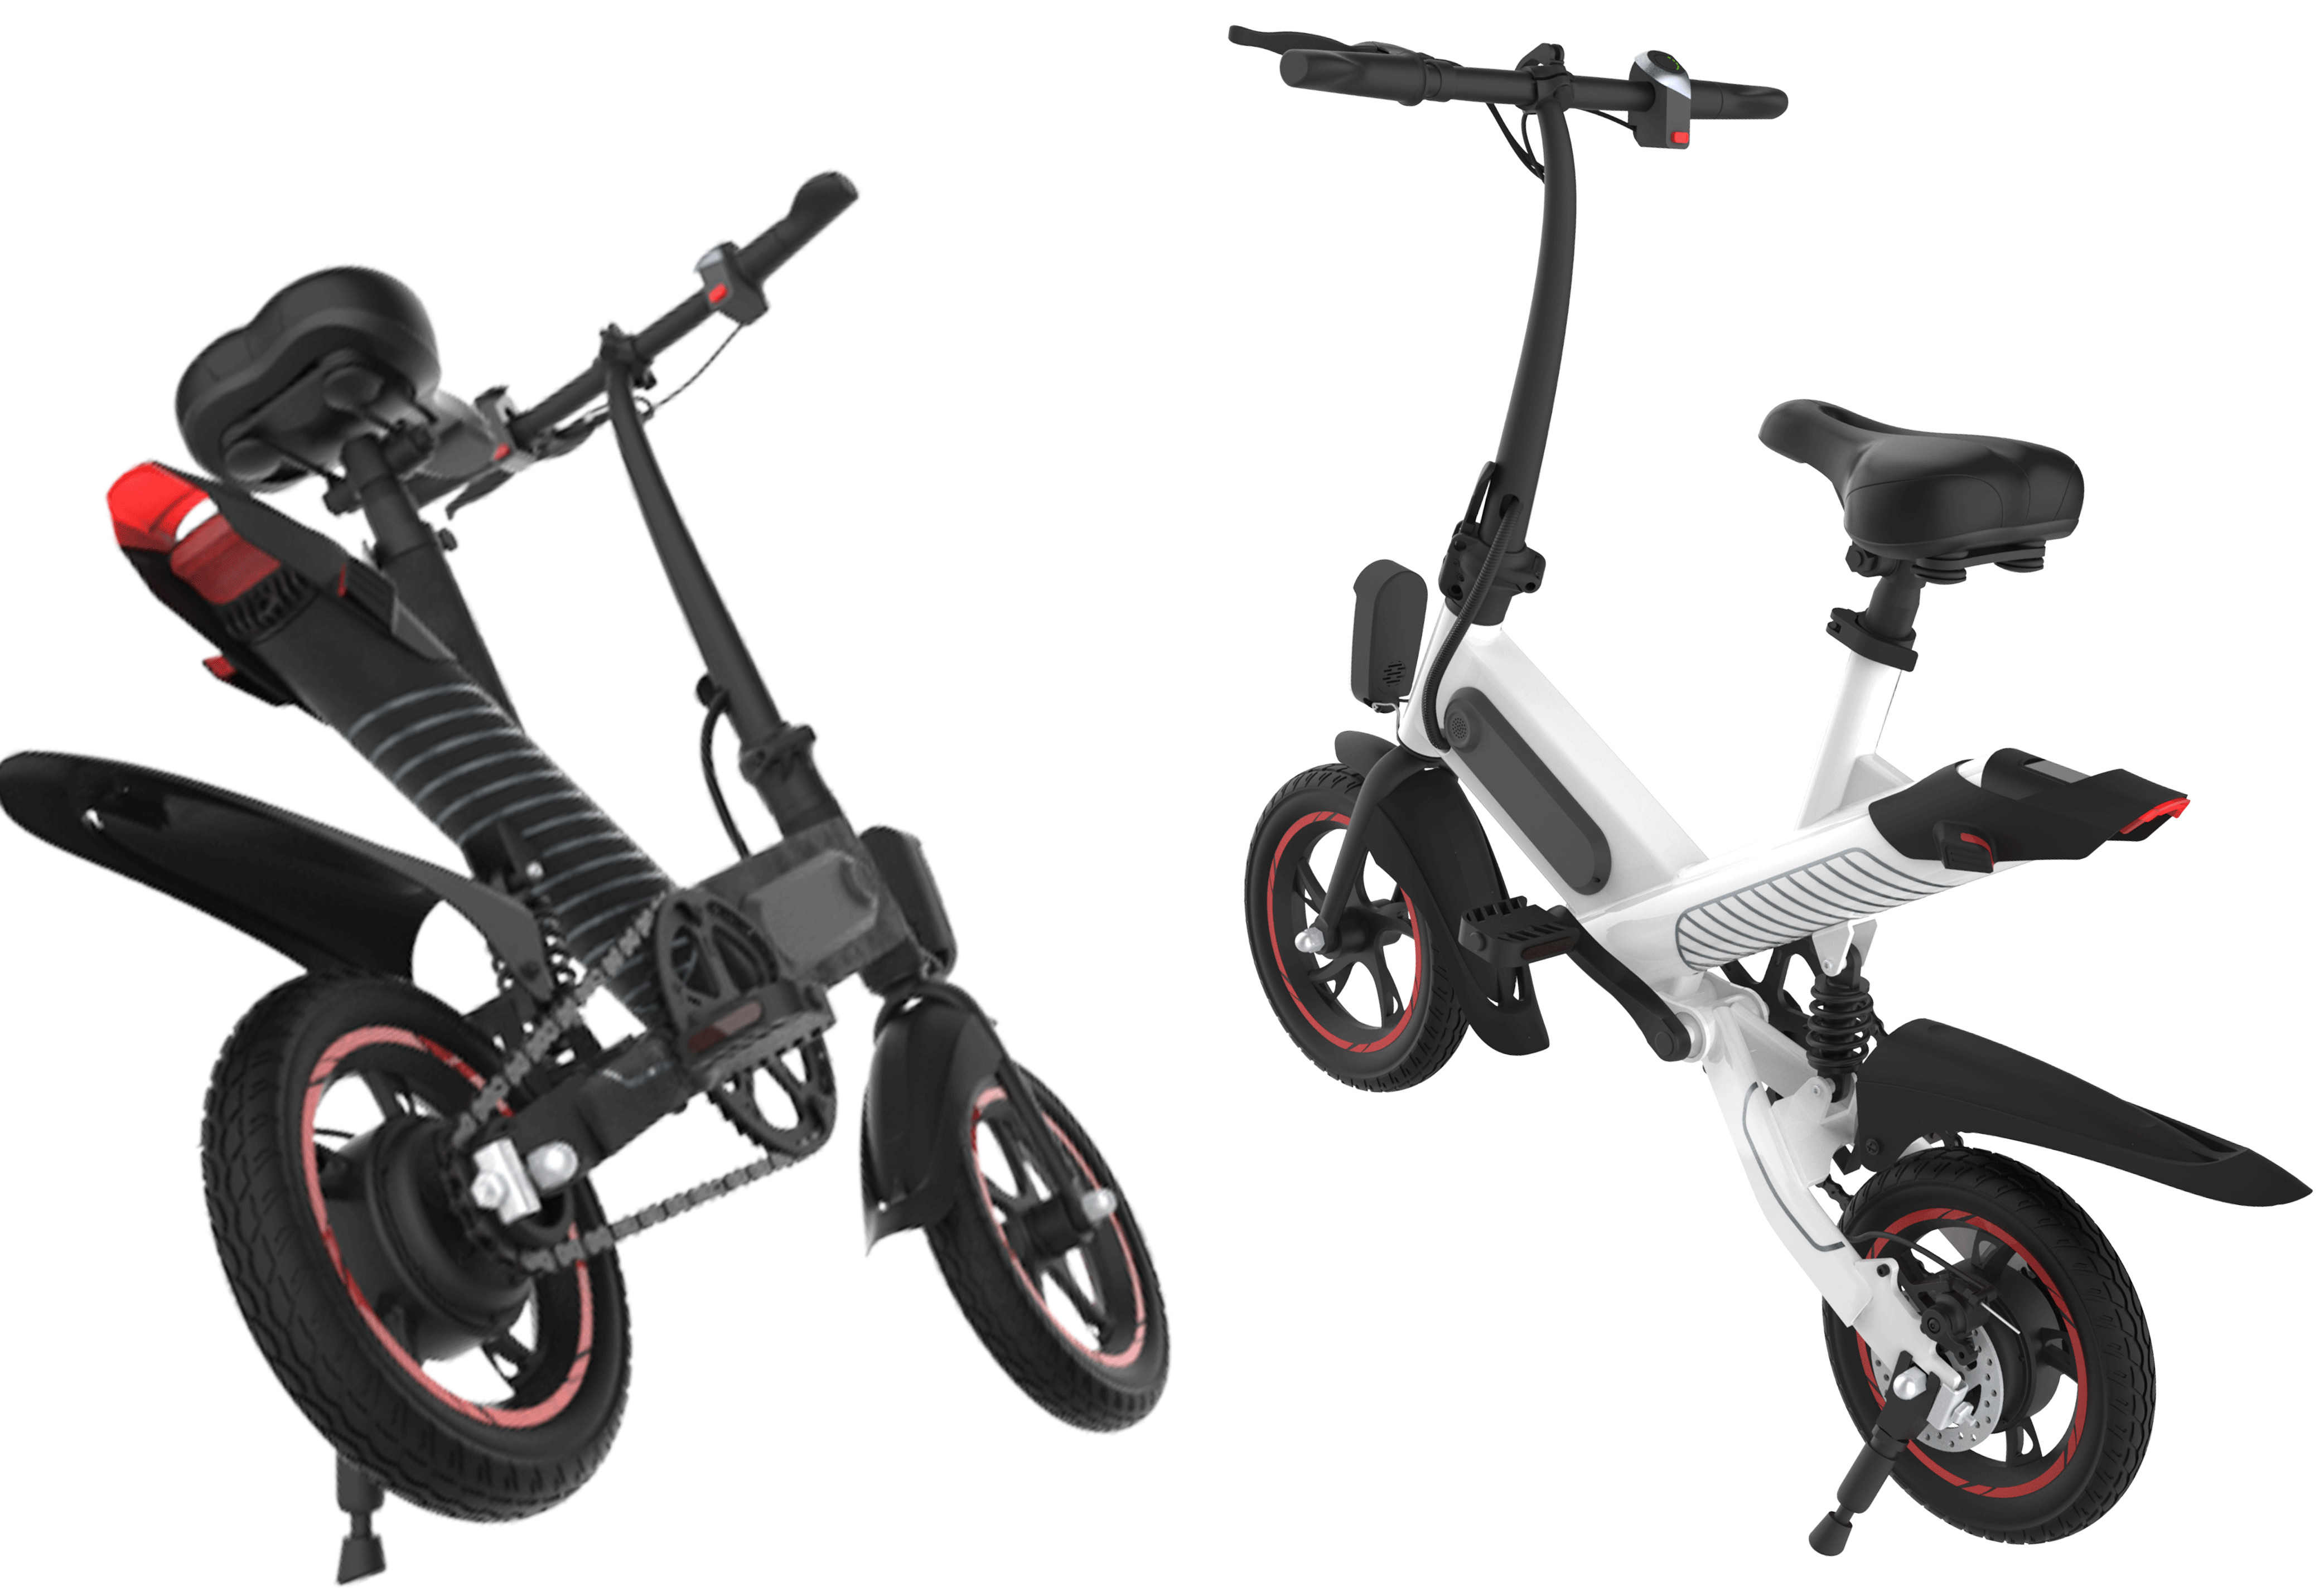  Portable Small Electric Bike , Triangular Structure Lightweight Folding Bike Manufactures